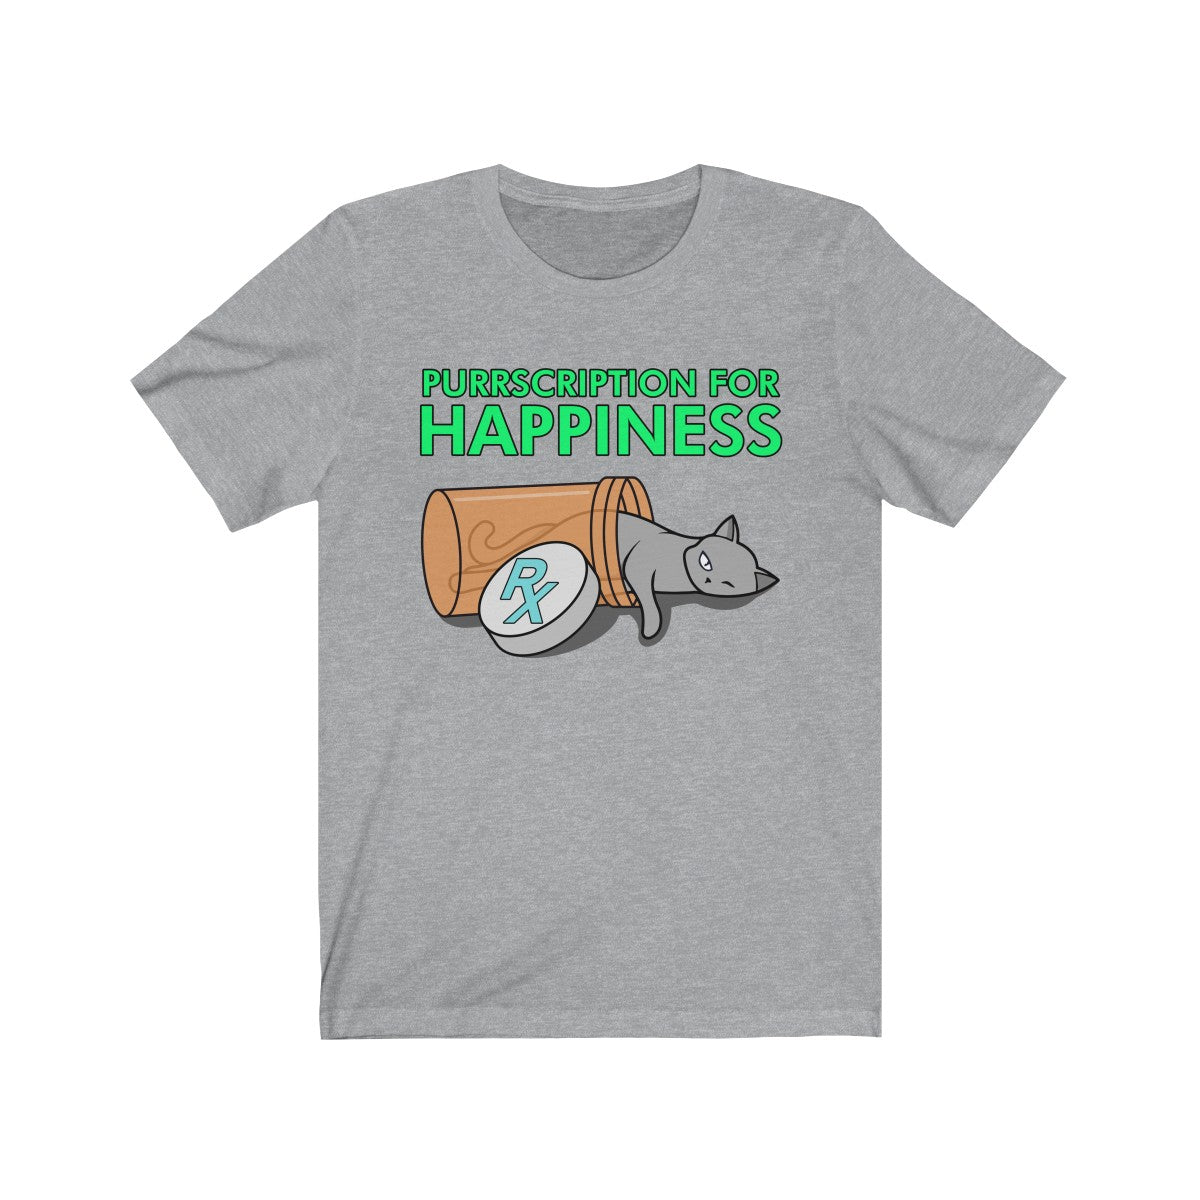 Purrscription For Happiness Tee